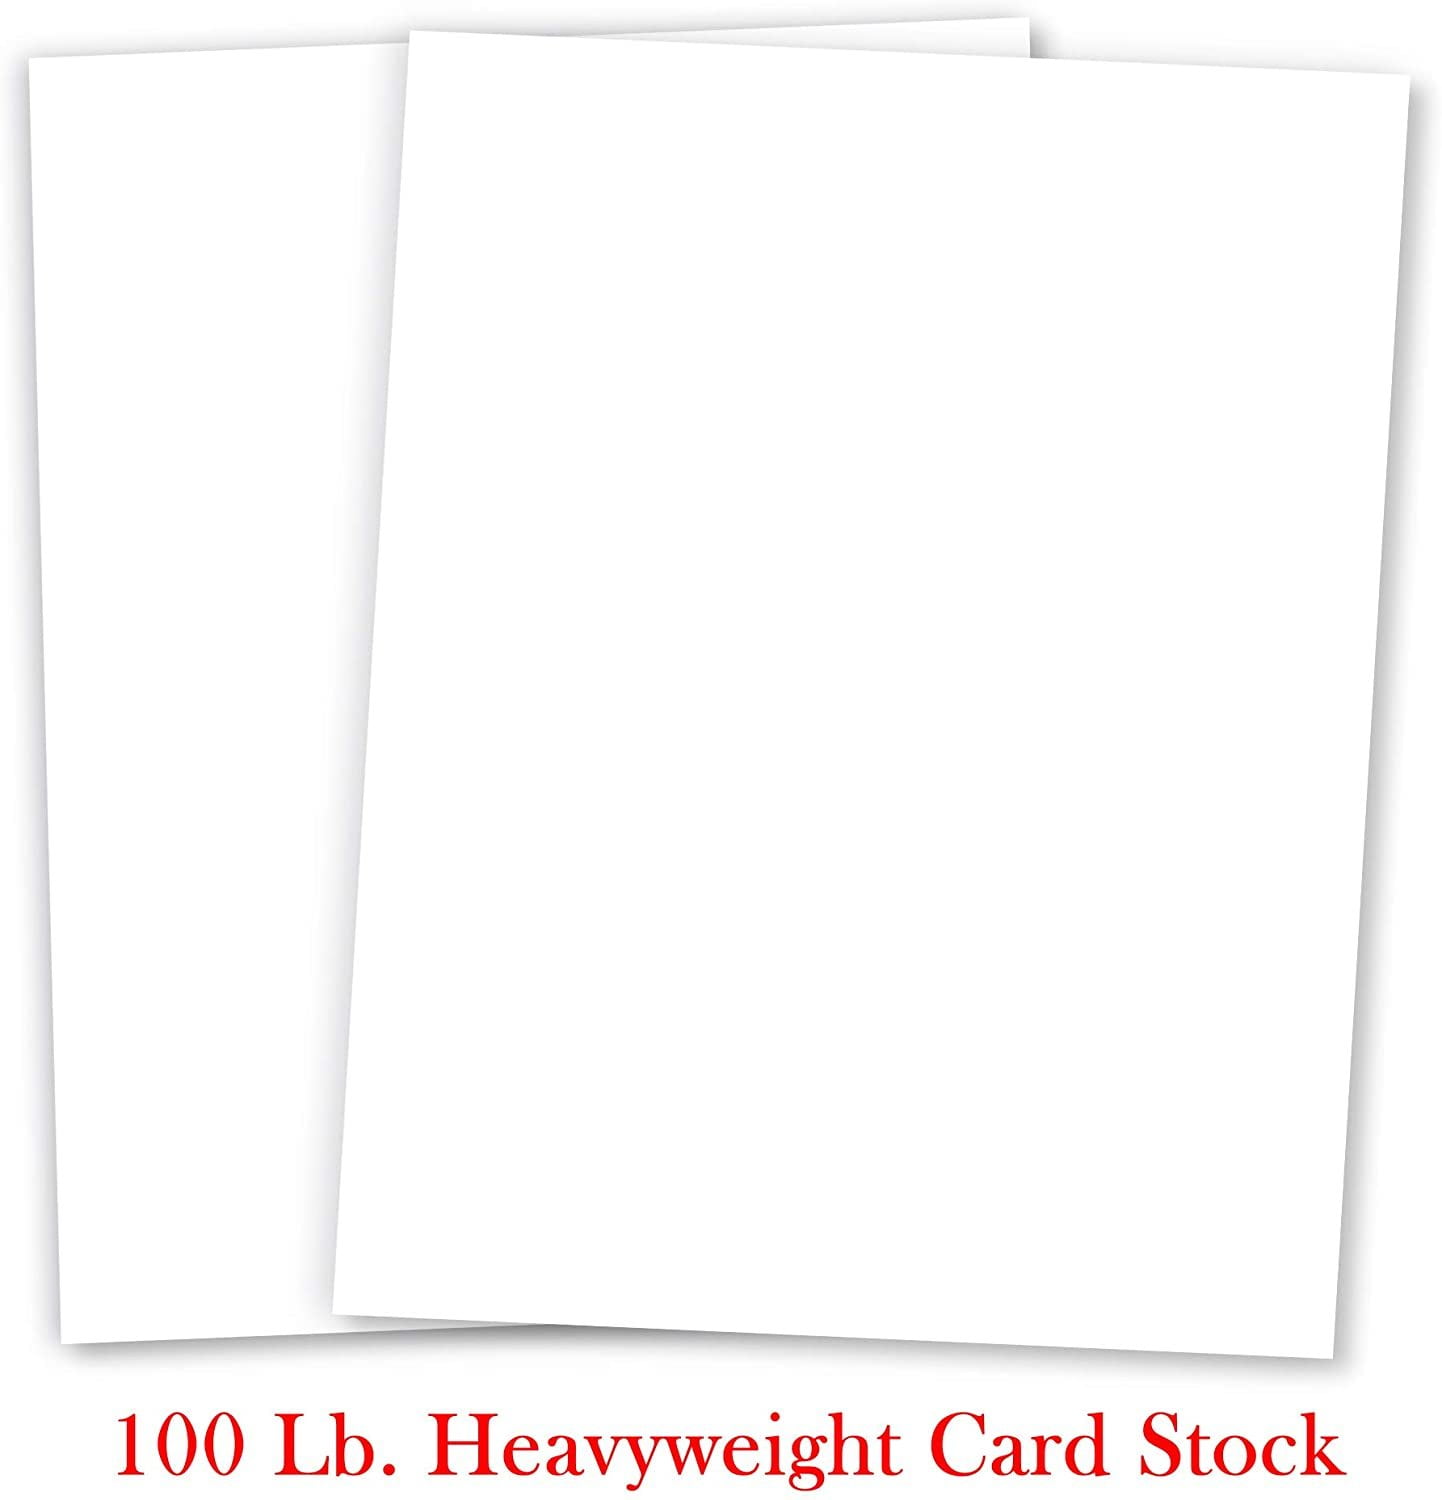 12 inch x 12 inch Square Cardstock | 80lb Cover White Thick Card Stock Paper - Smooth Finish | for Scrapbooking, Arts and Crafts, Wedding Invitations